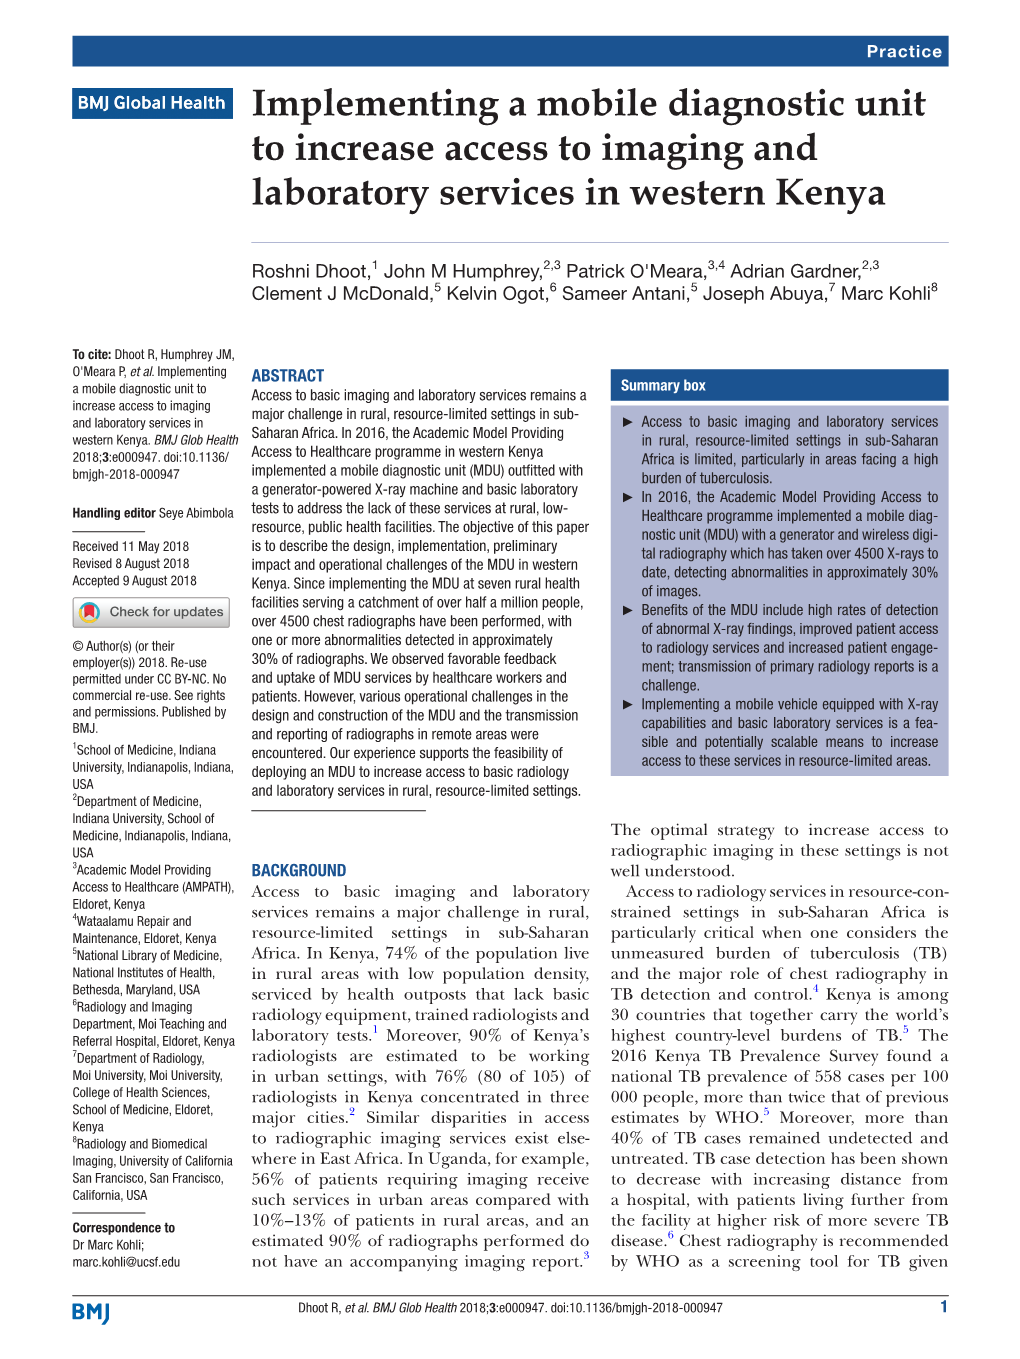 Implementing a Mobile Diagnostic Unit to Increase Access to Imaging and Laboratory Services in Western Kenya